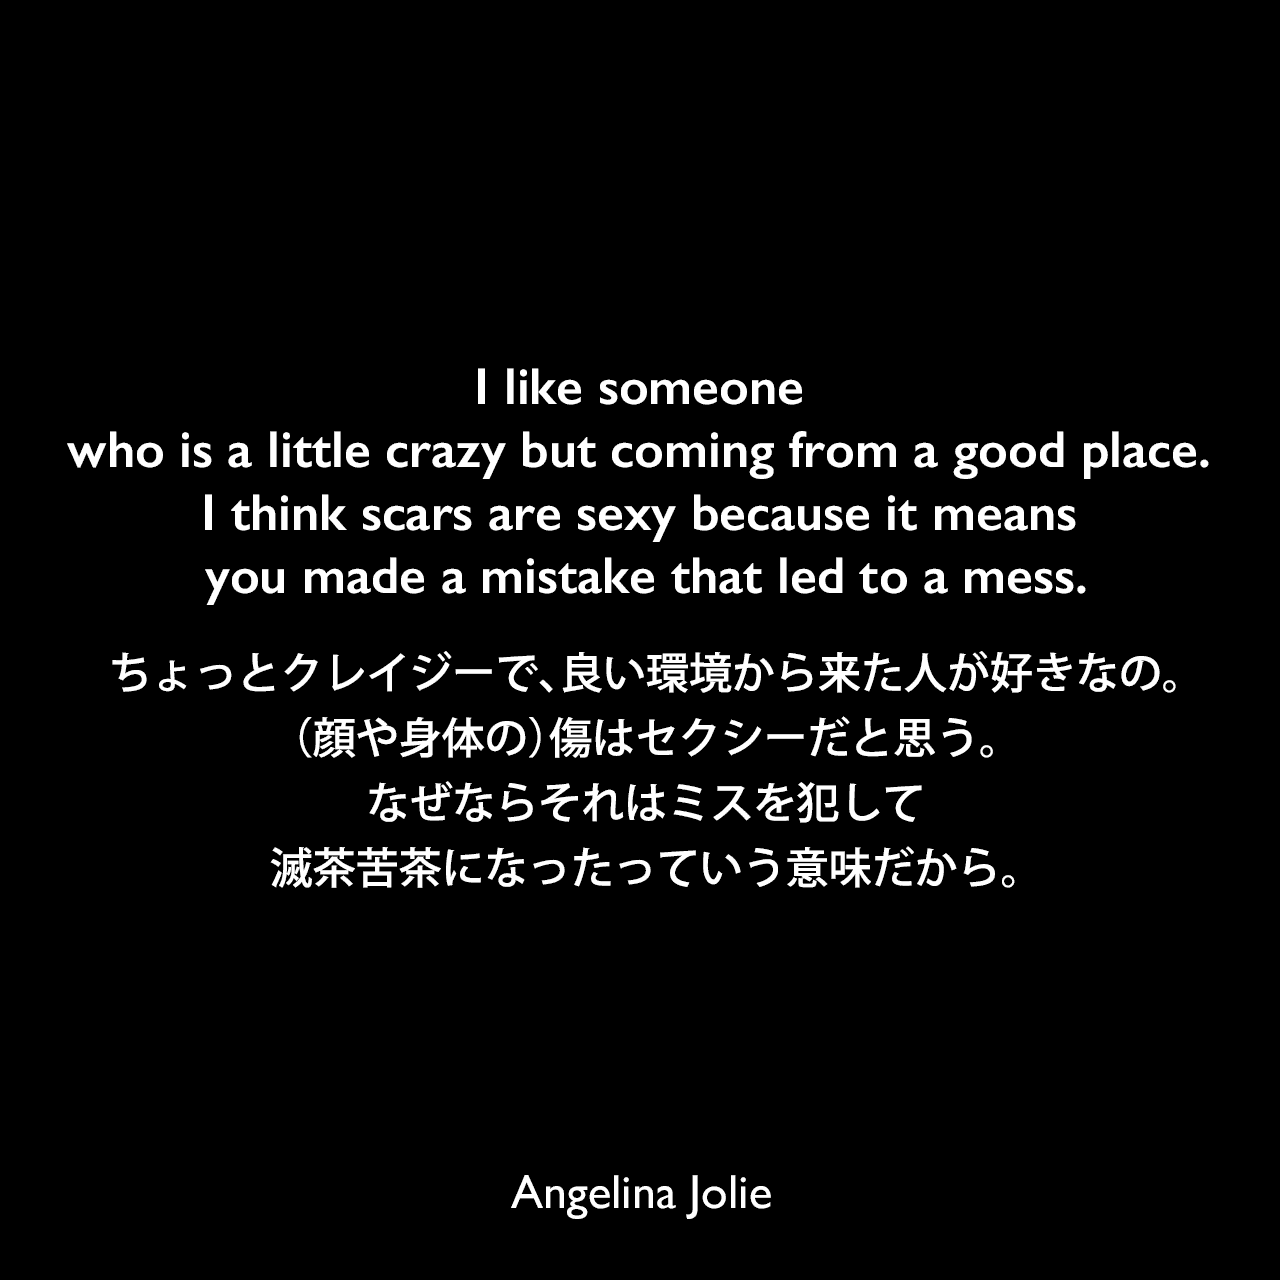 I like someone who is a little crazy but coming from a good place. I think scars are sexy because it means you made a mistake that led to a mess.ちょっとクレイジーで、良い環境から来た人が好きなの。（顔や身体の）傷はセクシーだと思う。なぜならそれはミスを犯して滅茶苦茶になったっていう意味だから。Angelina Jolie